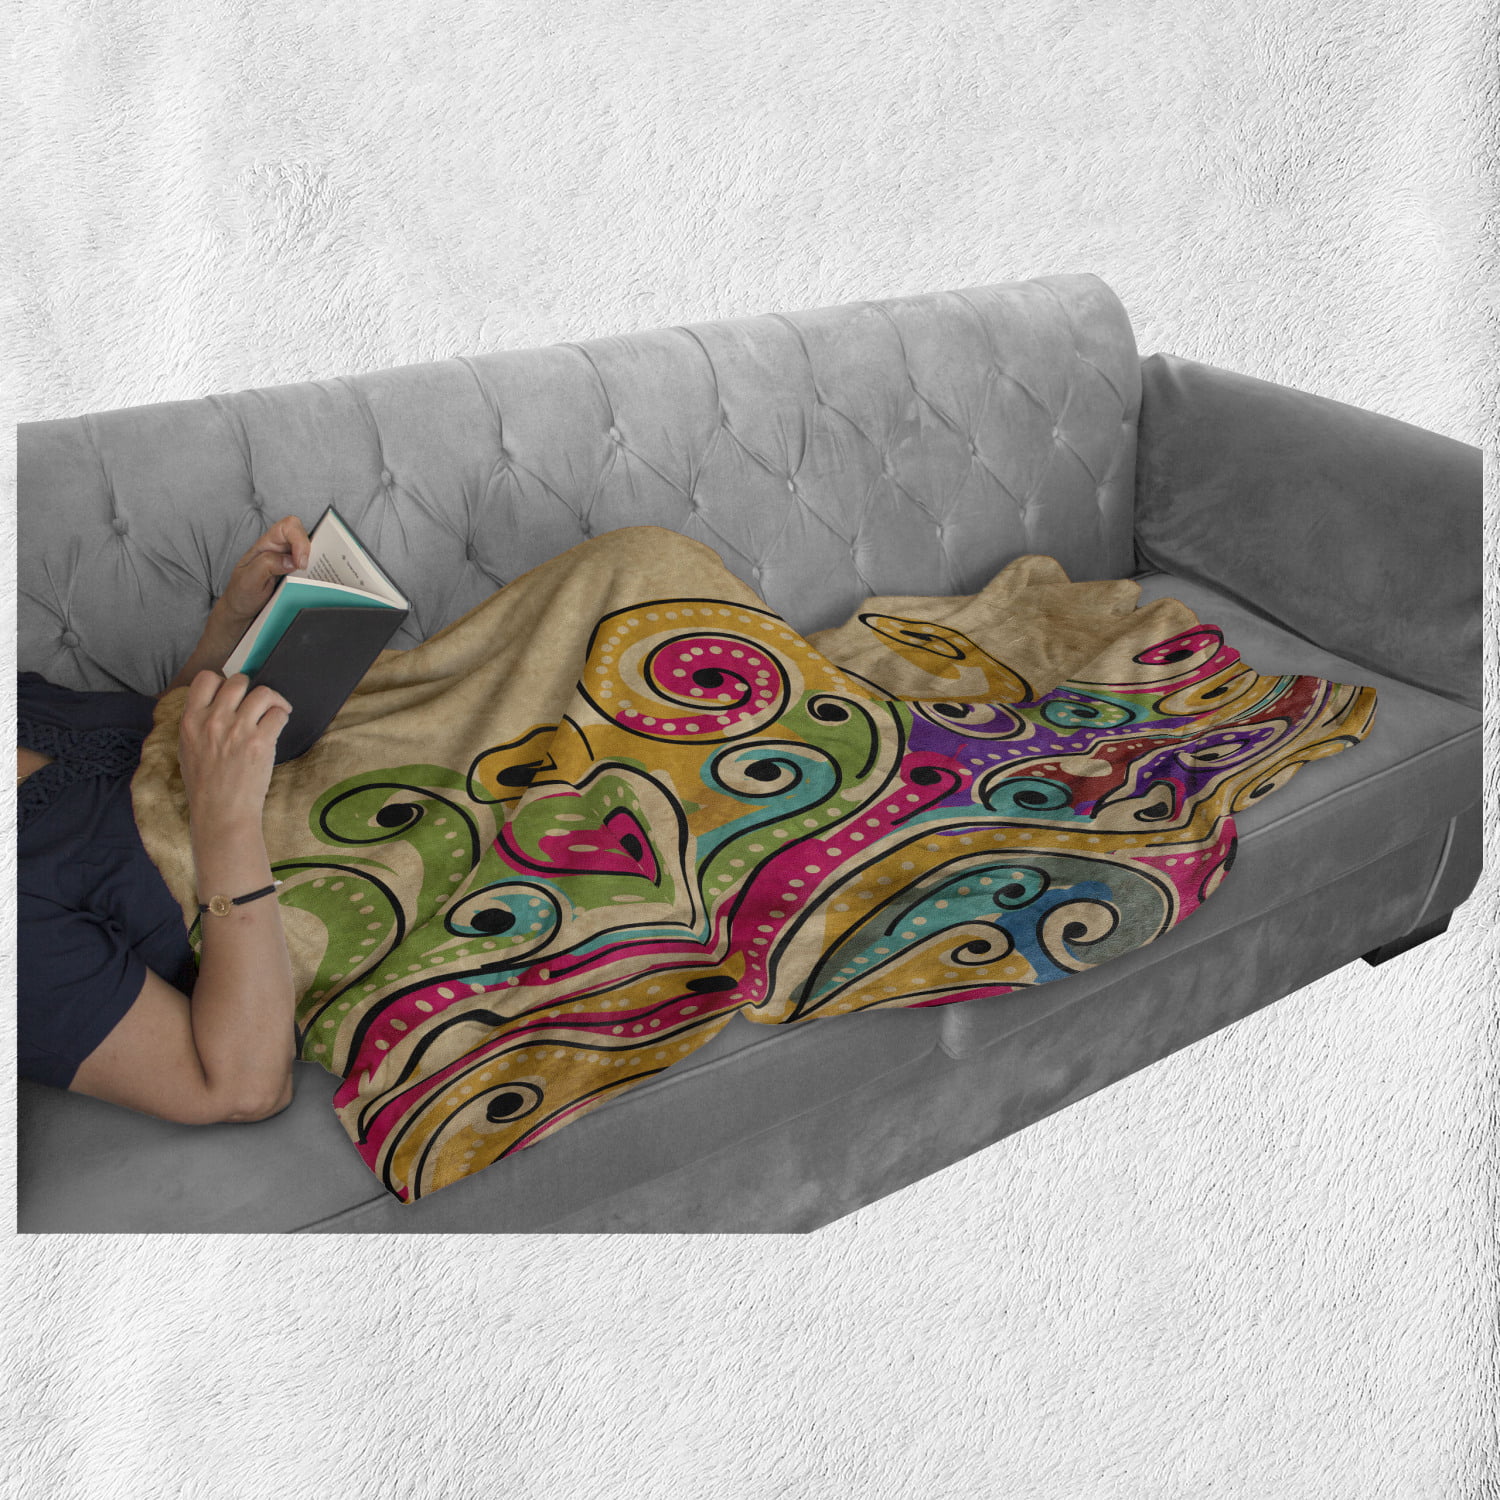 Cozy Plush for Indoor and Outdoor Use Ambesonne Tribal Soft Flannel Fleece Throw Blanket Multicolor 70 x 90 Traditional Folk Art Pattern with Hand Drawn Spiral Colorful Forms Image